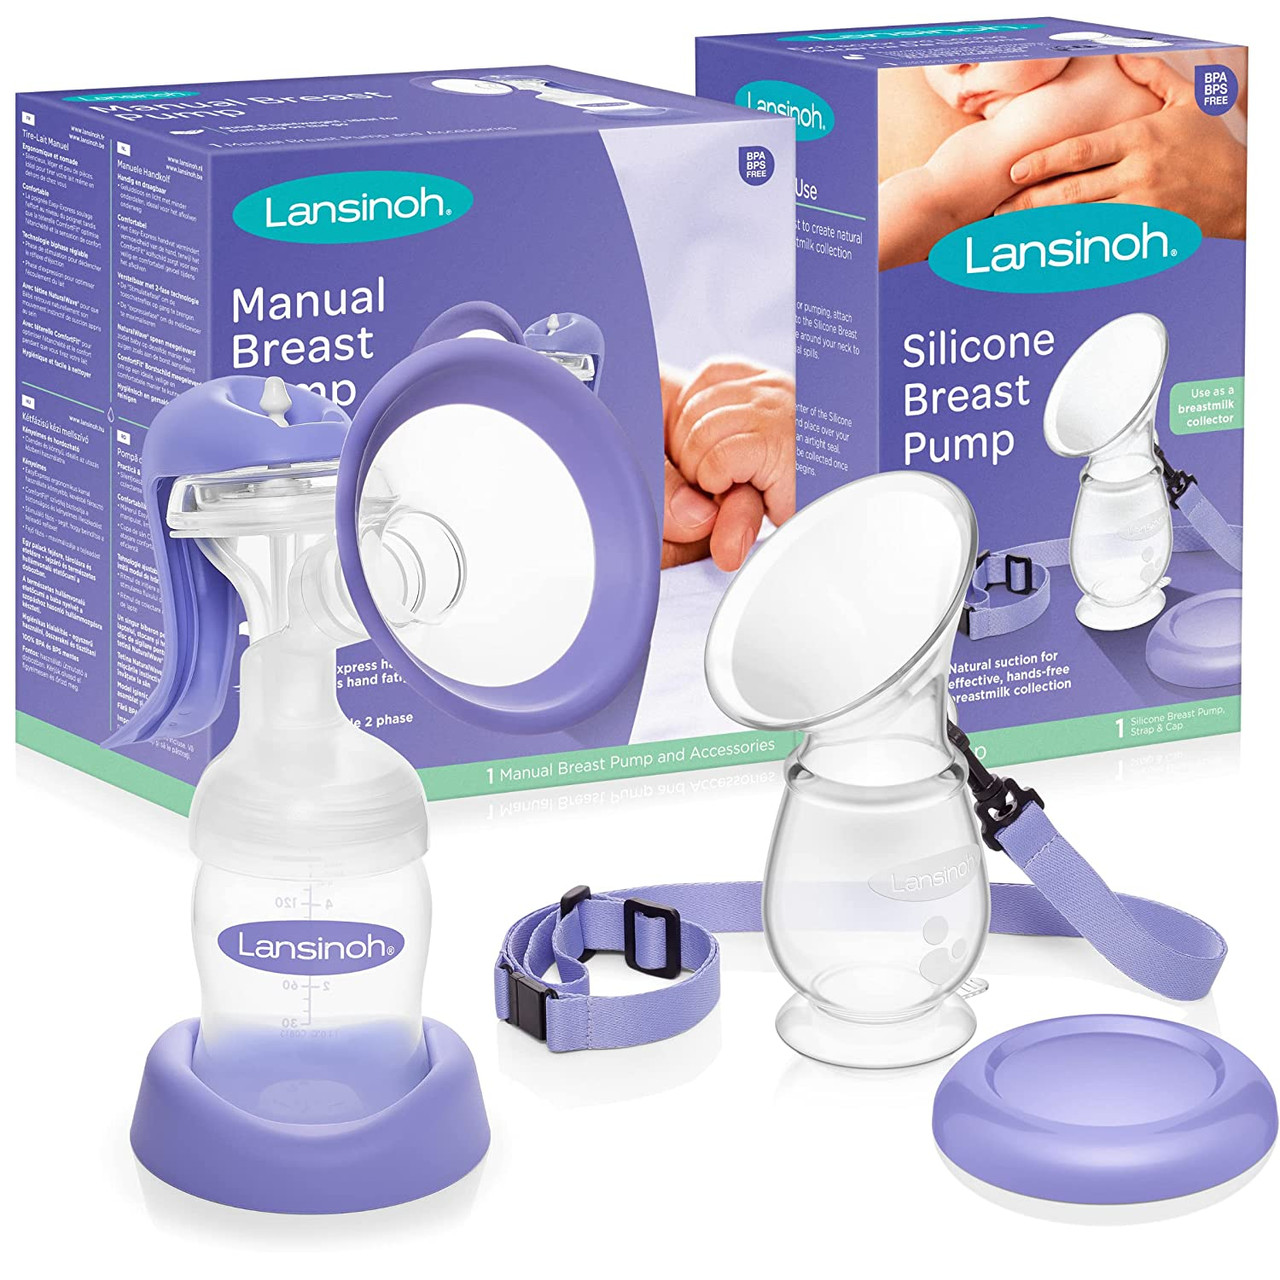 Lansinoh 1 Manual Breast Pump & Accessories 2 Phases, New